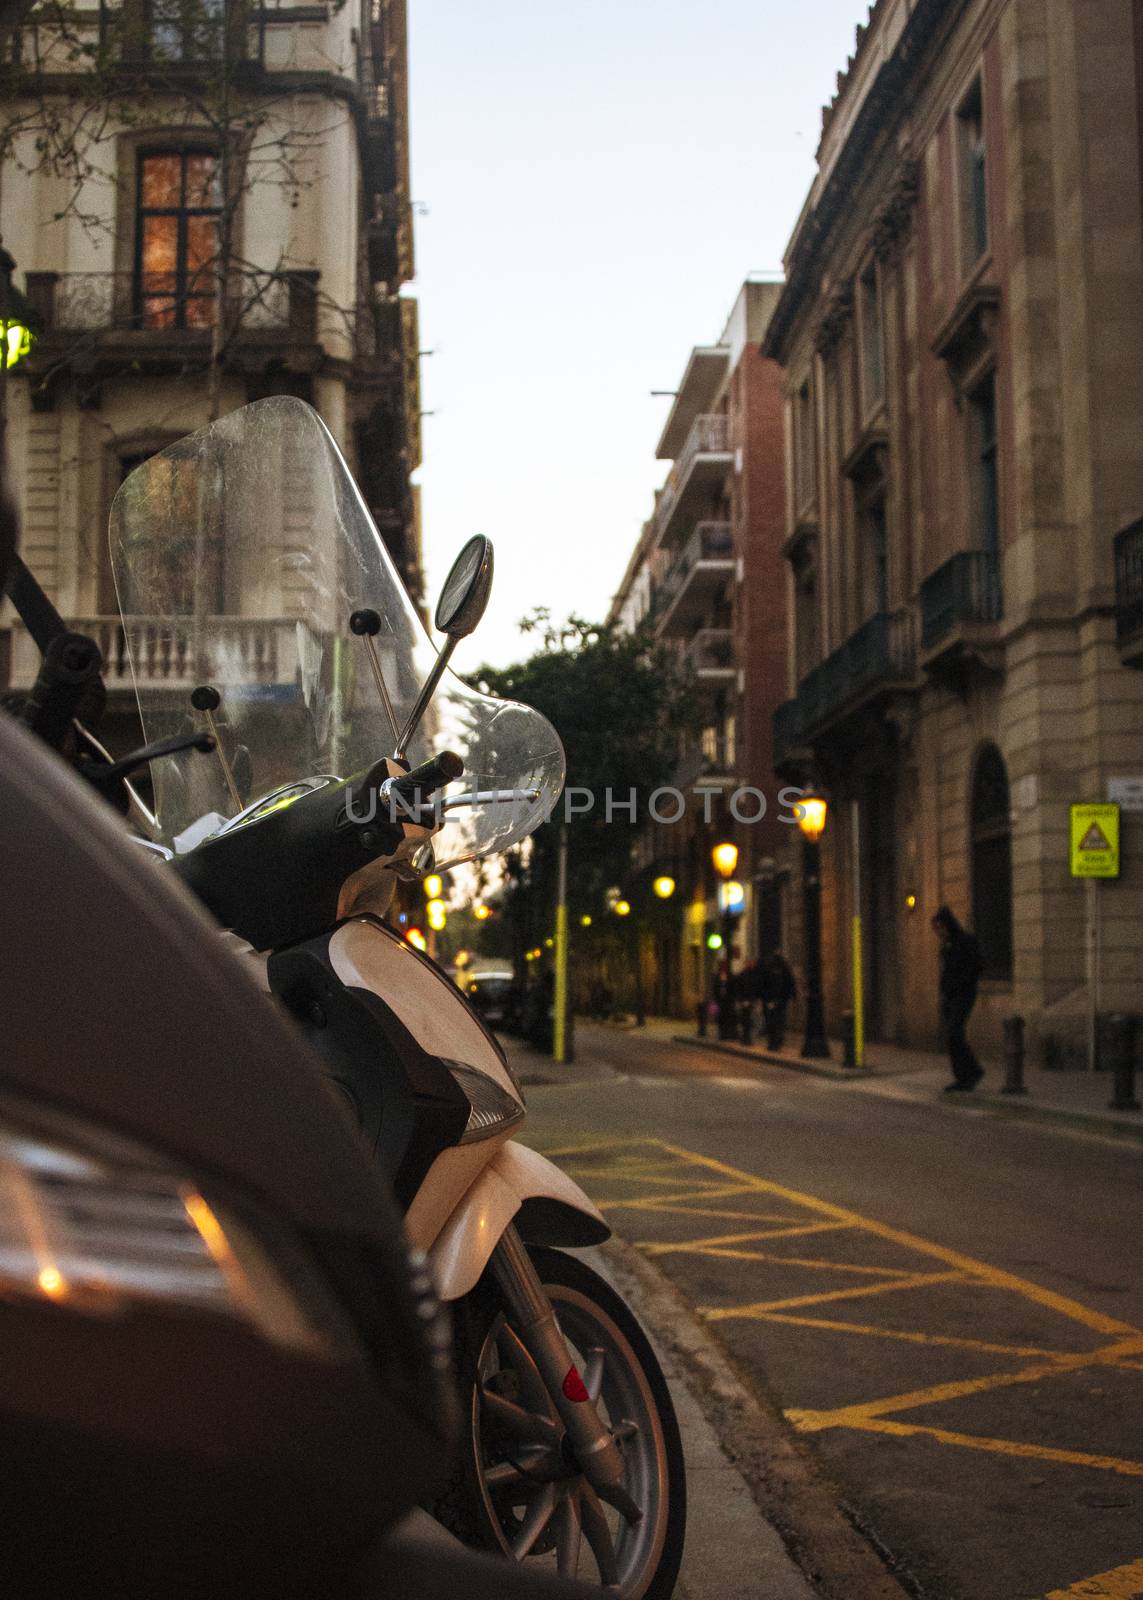 SPAIN,  BARCELONA aPRIL 2018 - Mopeds at the side of the road, early evening